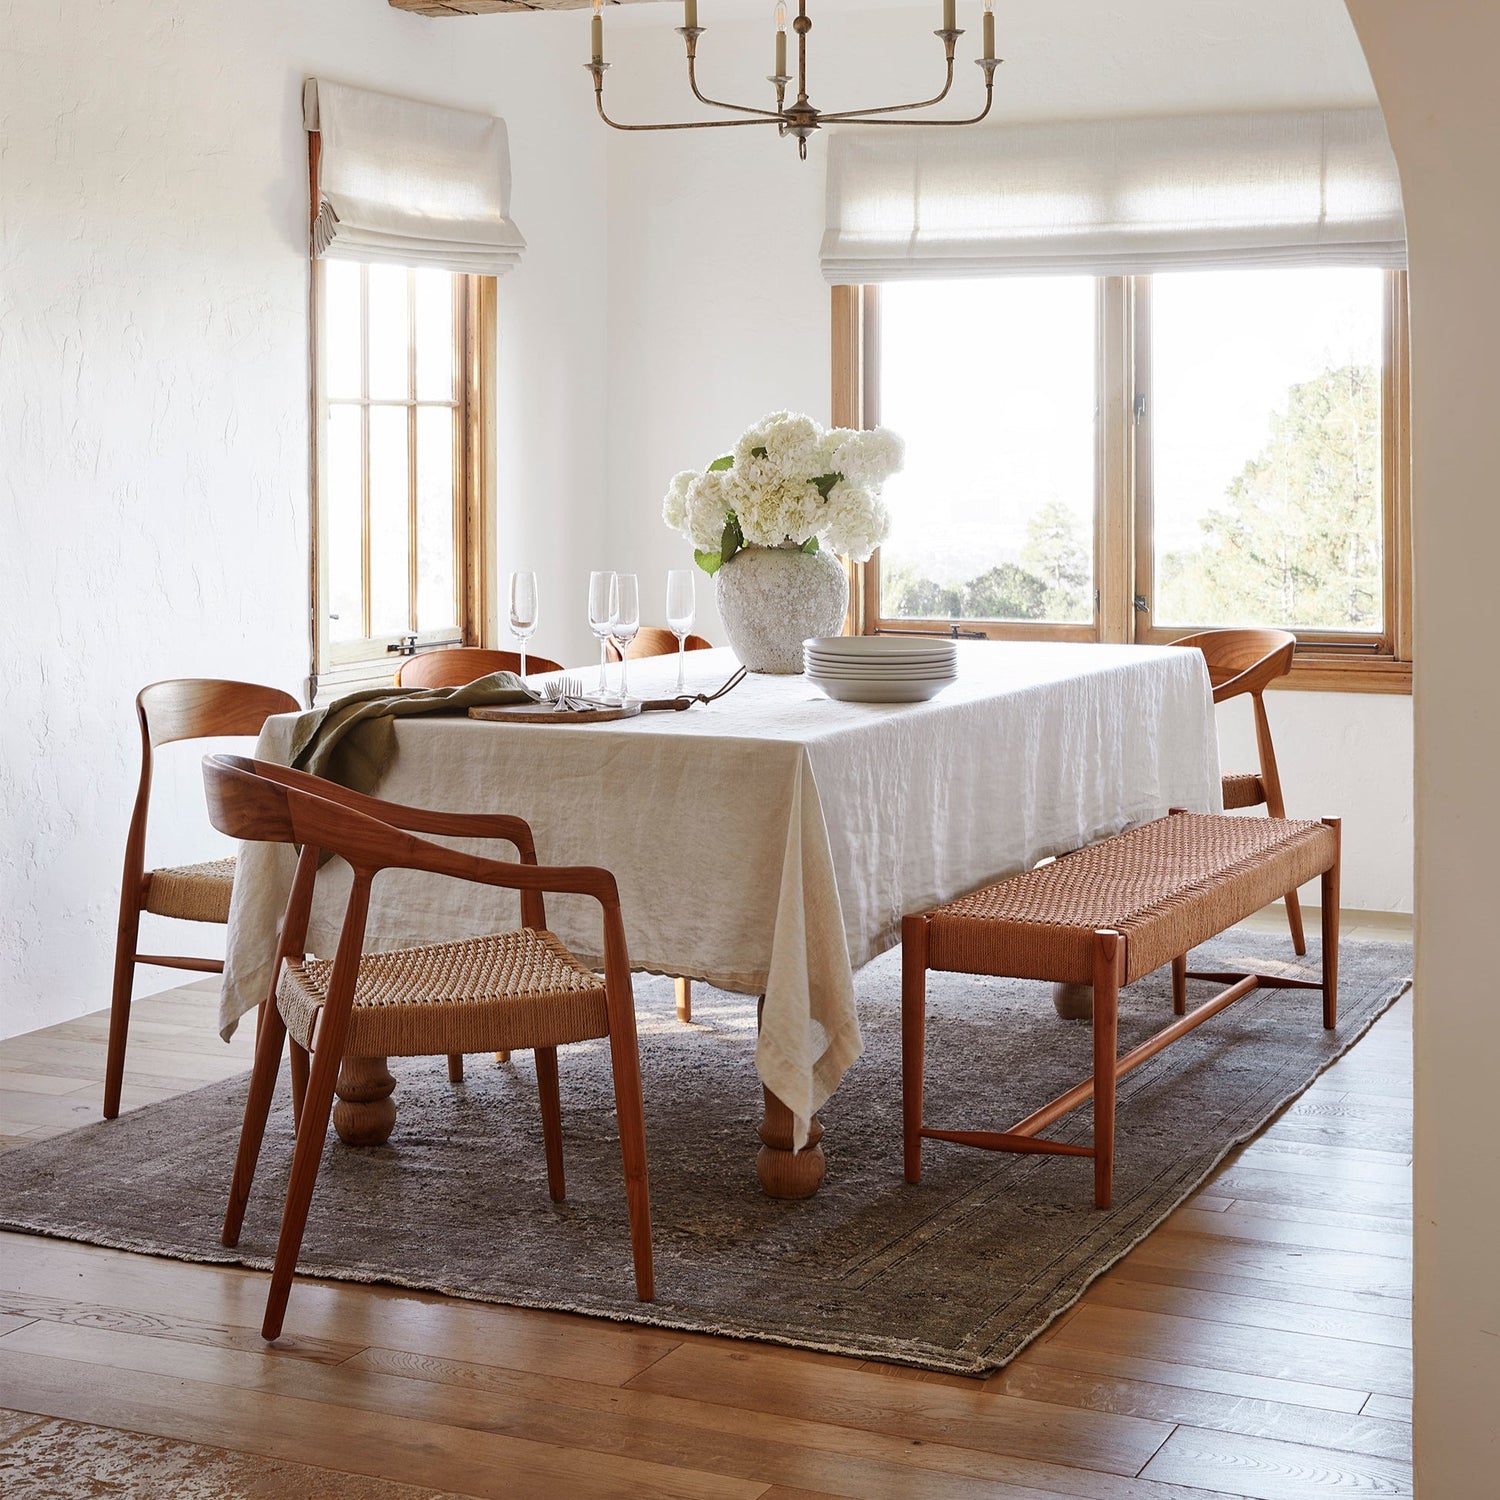 ingrid woven side chairs at dining table